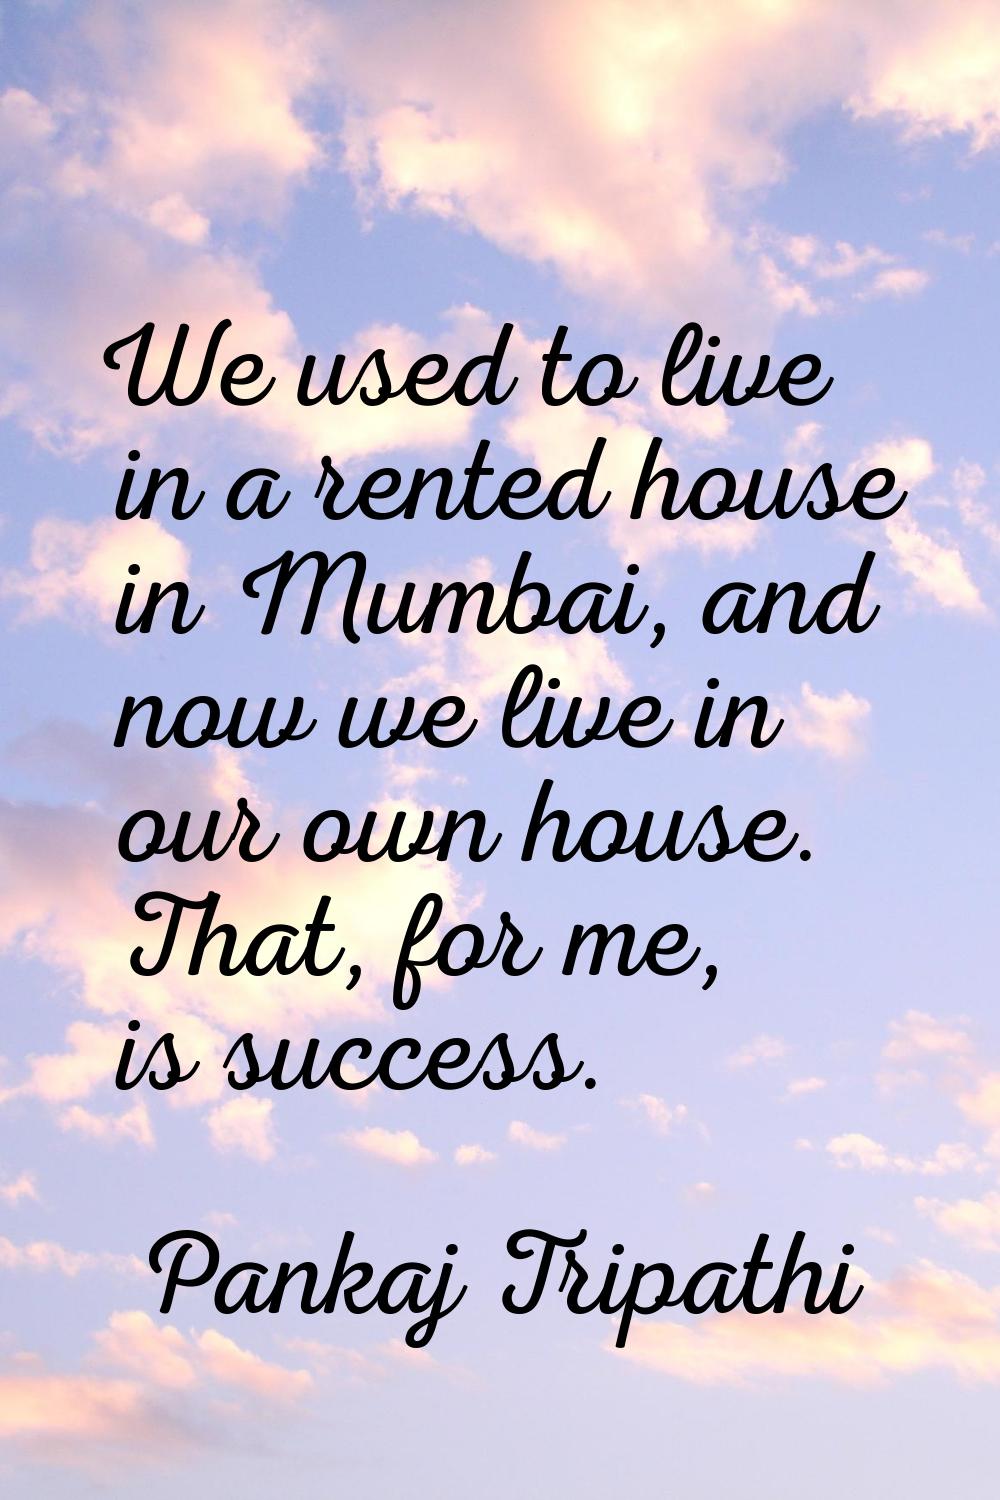 We used to live in a rented house in Mumbai, and now we live in our own house. That, for me, is suc